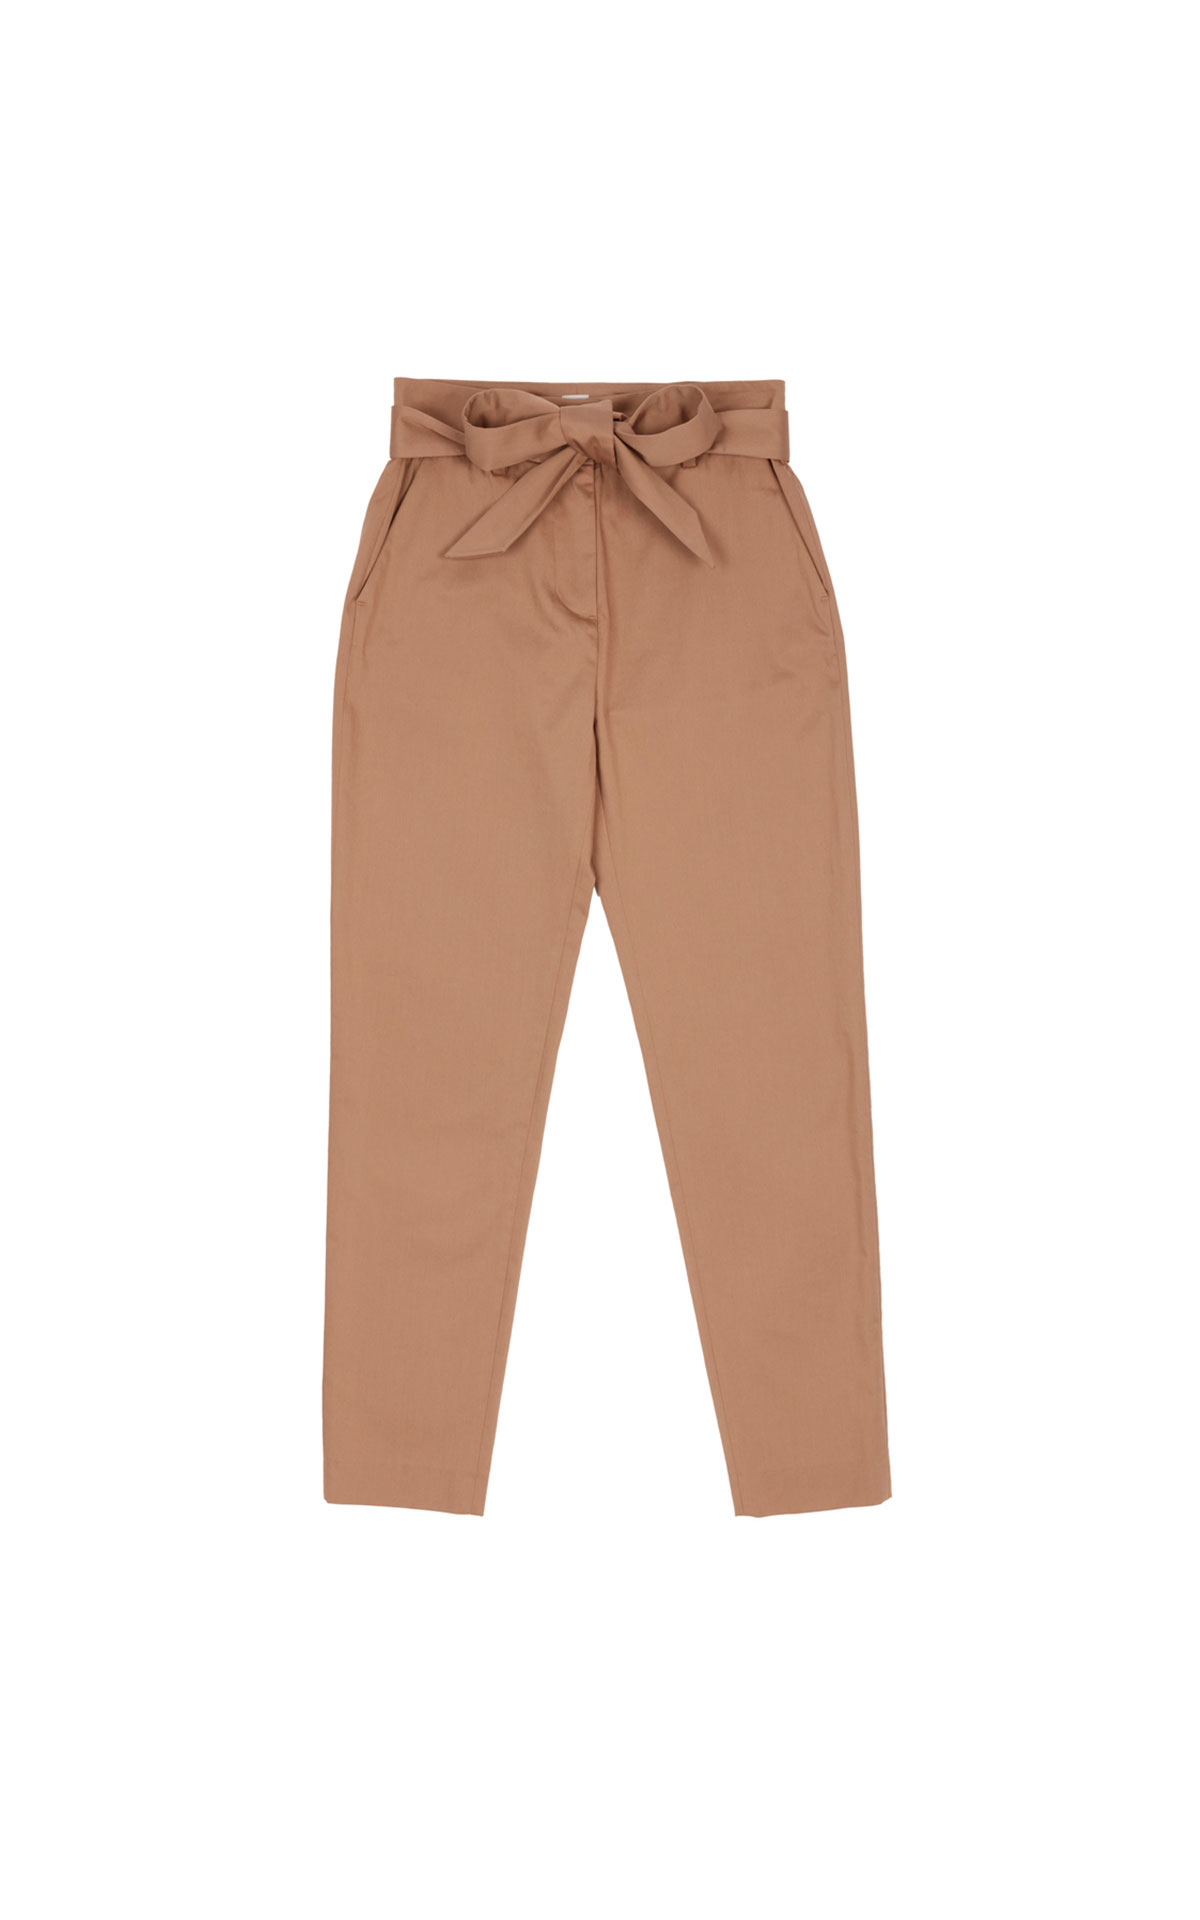 Eleventy New York cotton trousers womens from Bicester Village